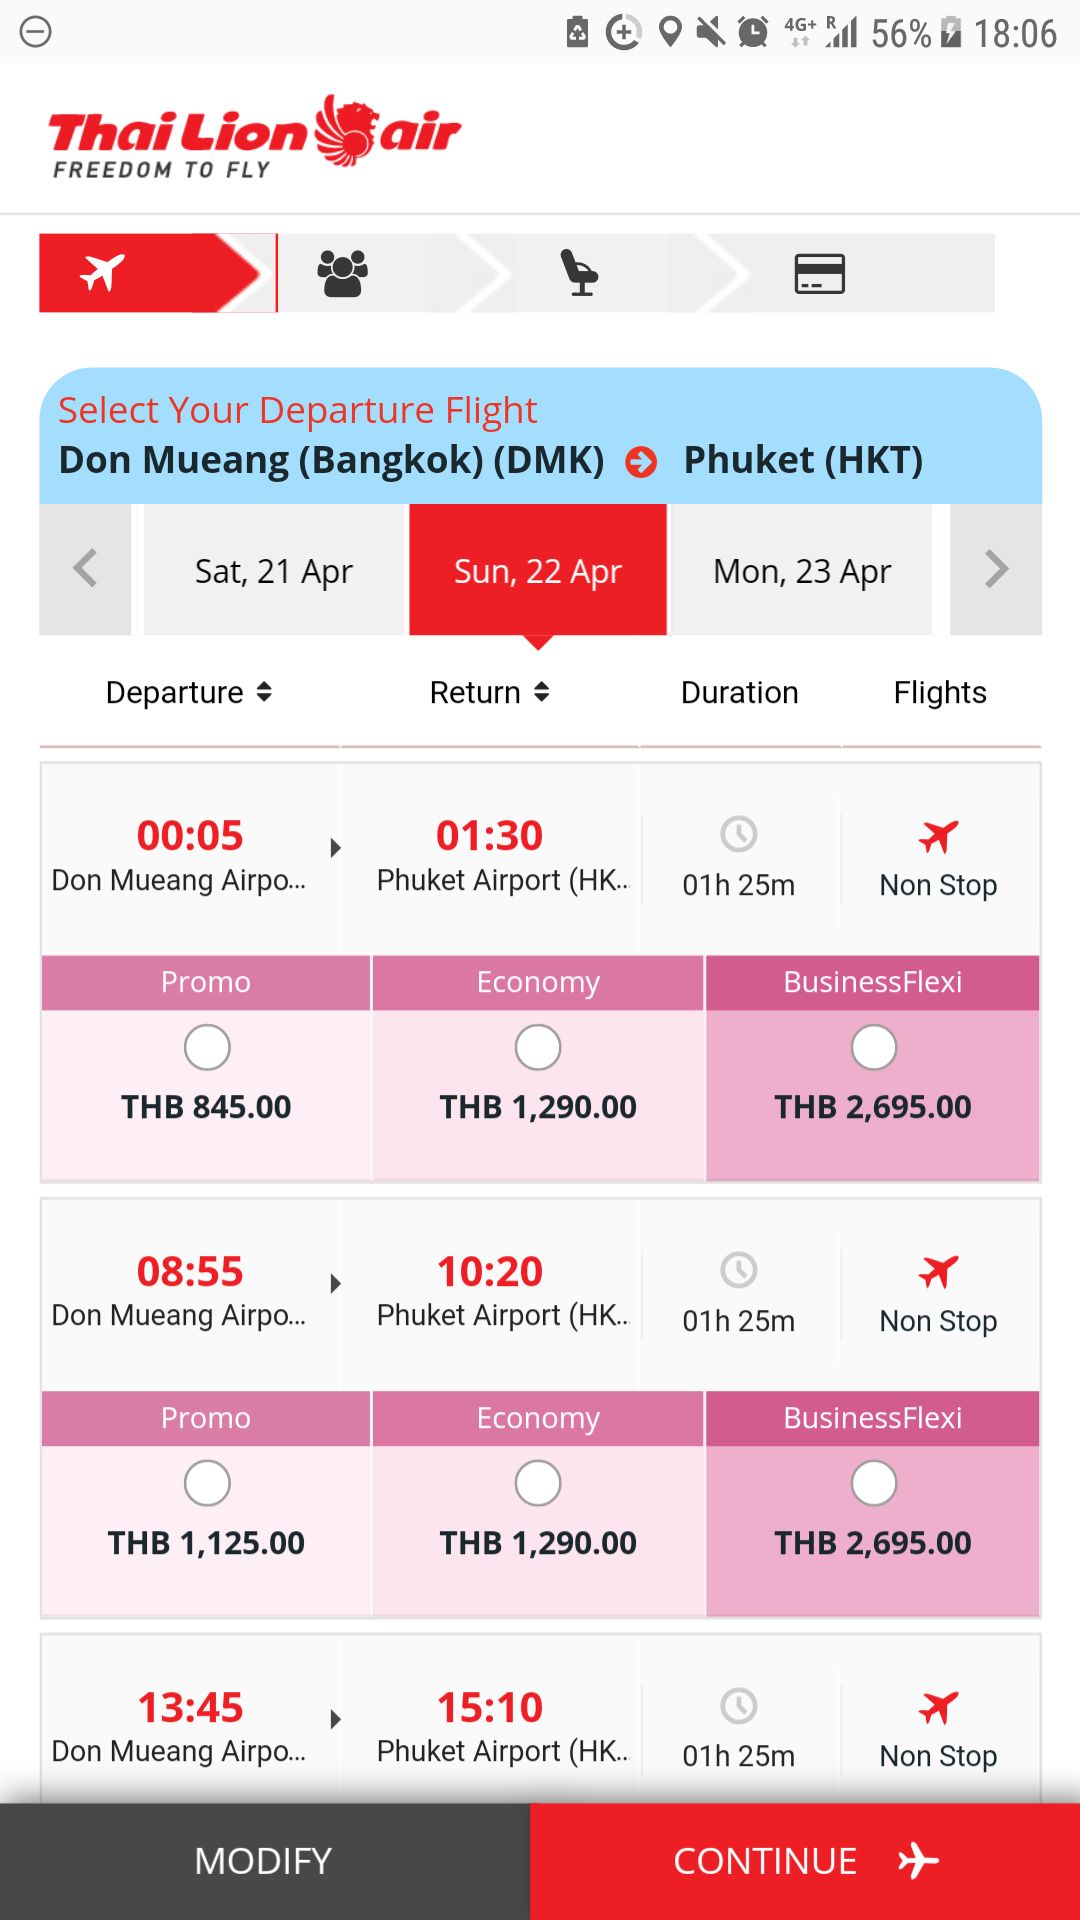 Thai Lion Air Promo Code for Domestic Flights - Klook